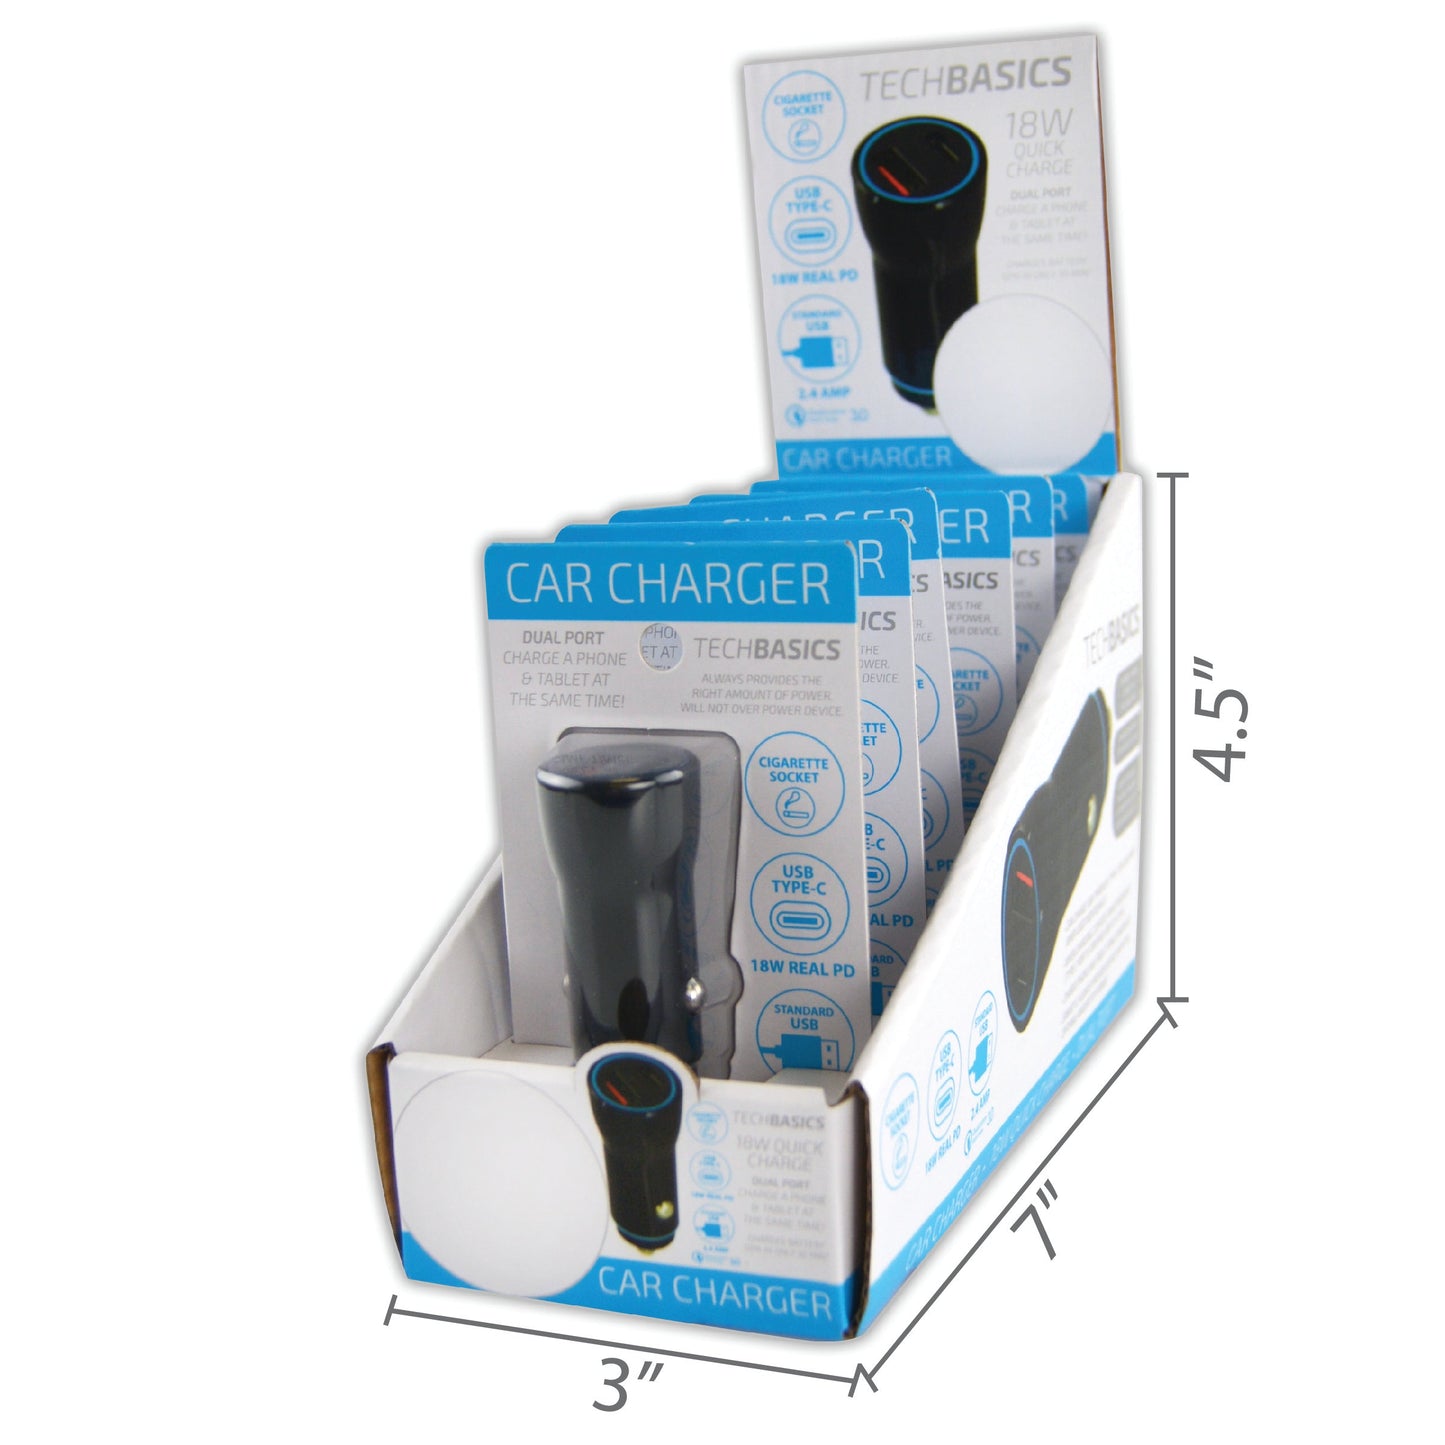 ITEM NUMBER 023310 18W CAR CHARGER 6 PIECES PER DISPLAY